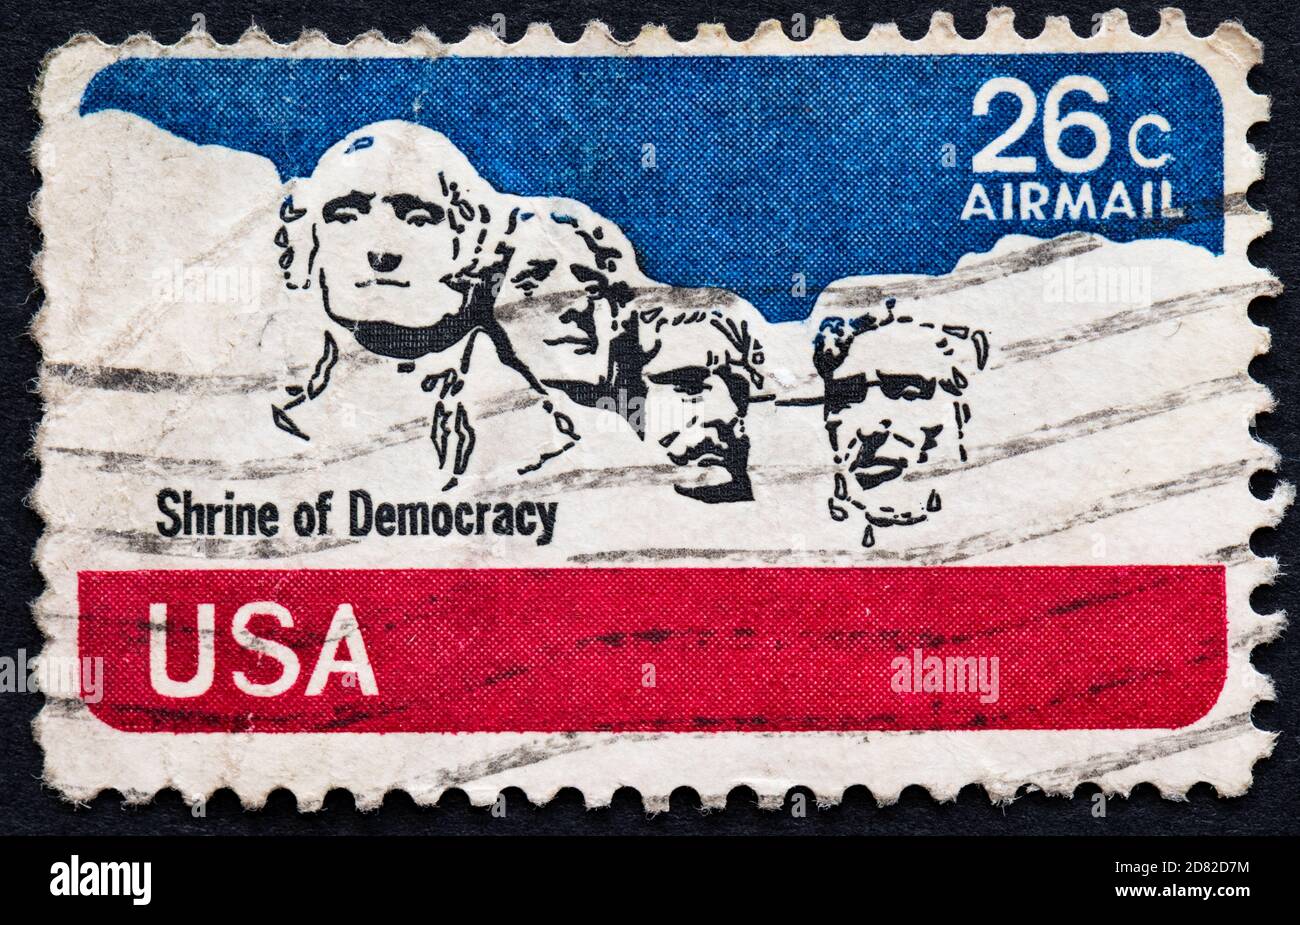 Mount Rushmore National Memorial 26c airmail postage stamp issued 1974  USA Stock Photo